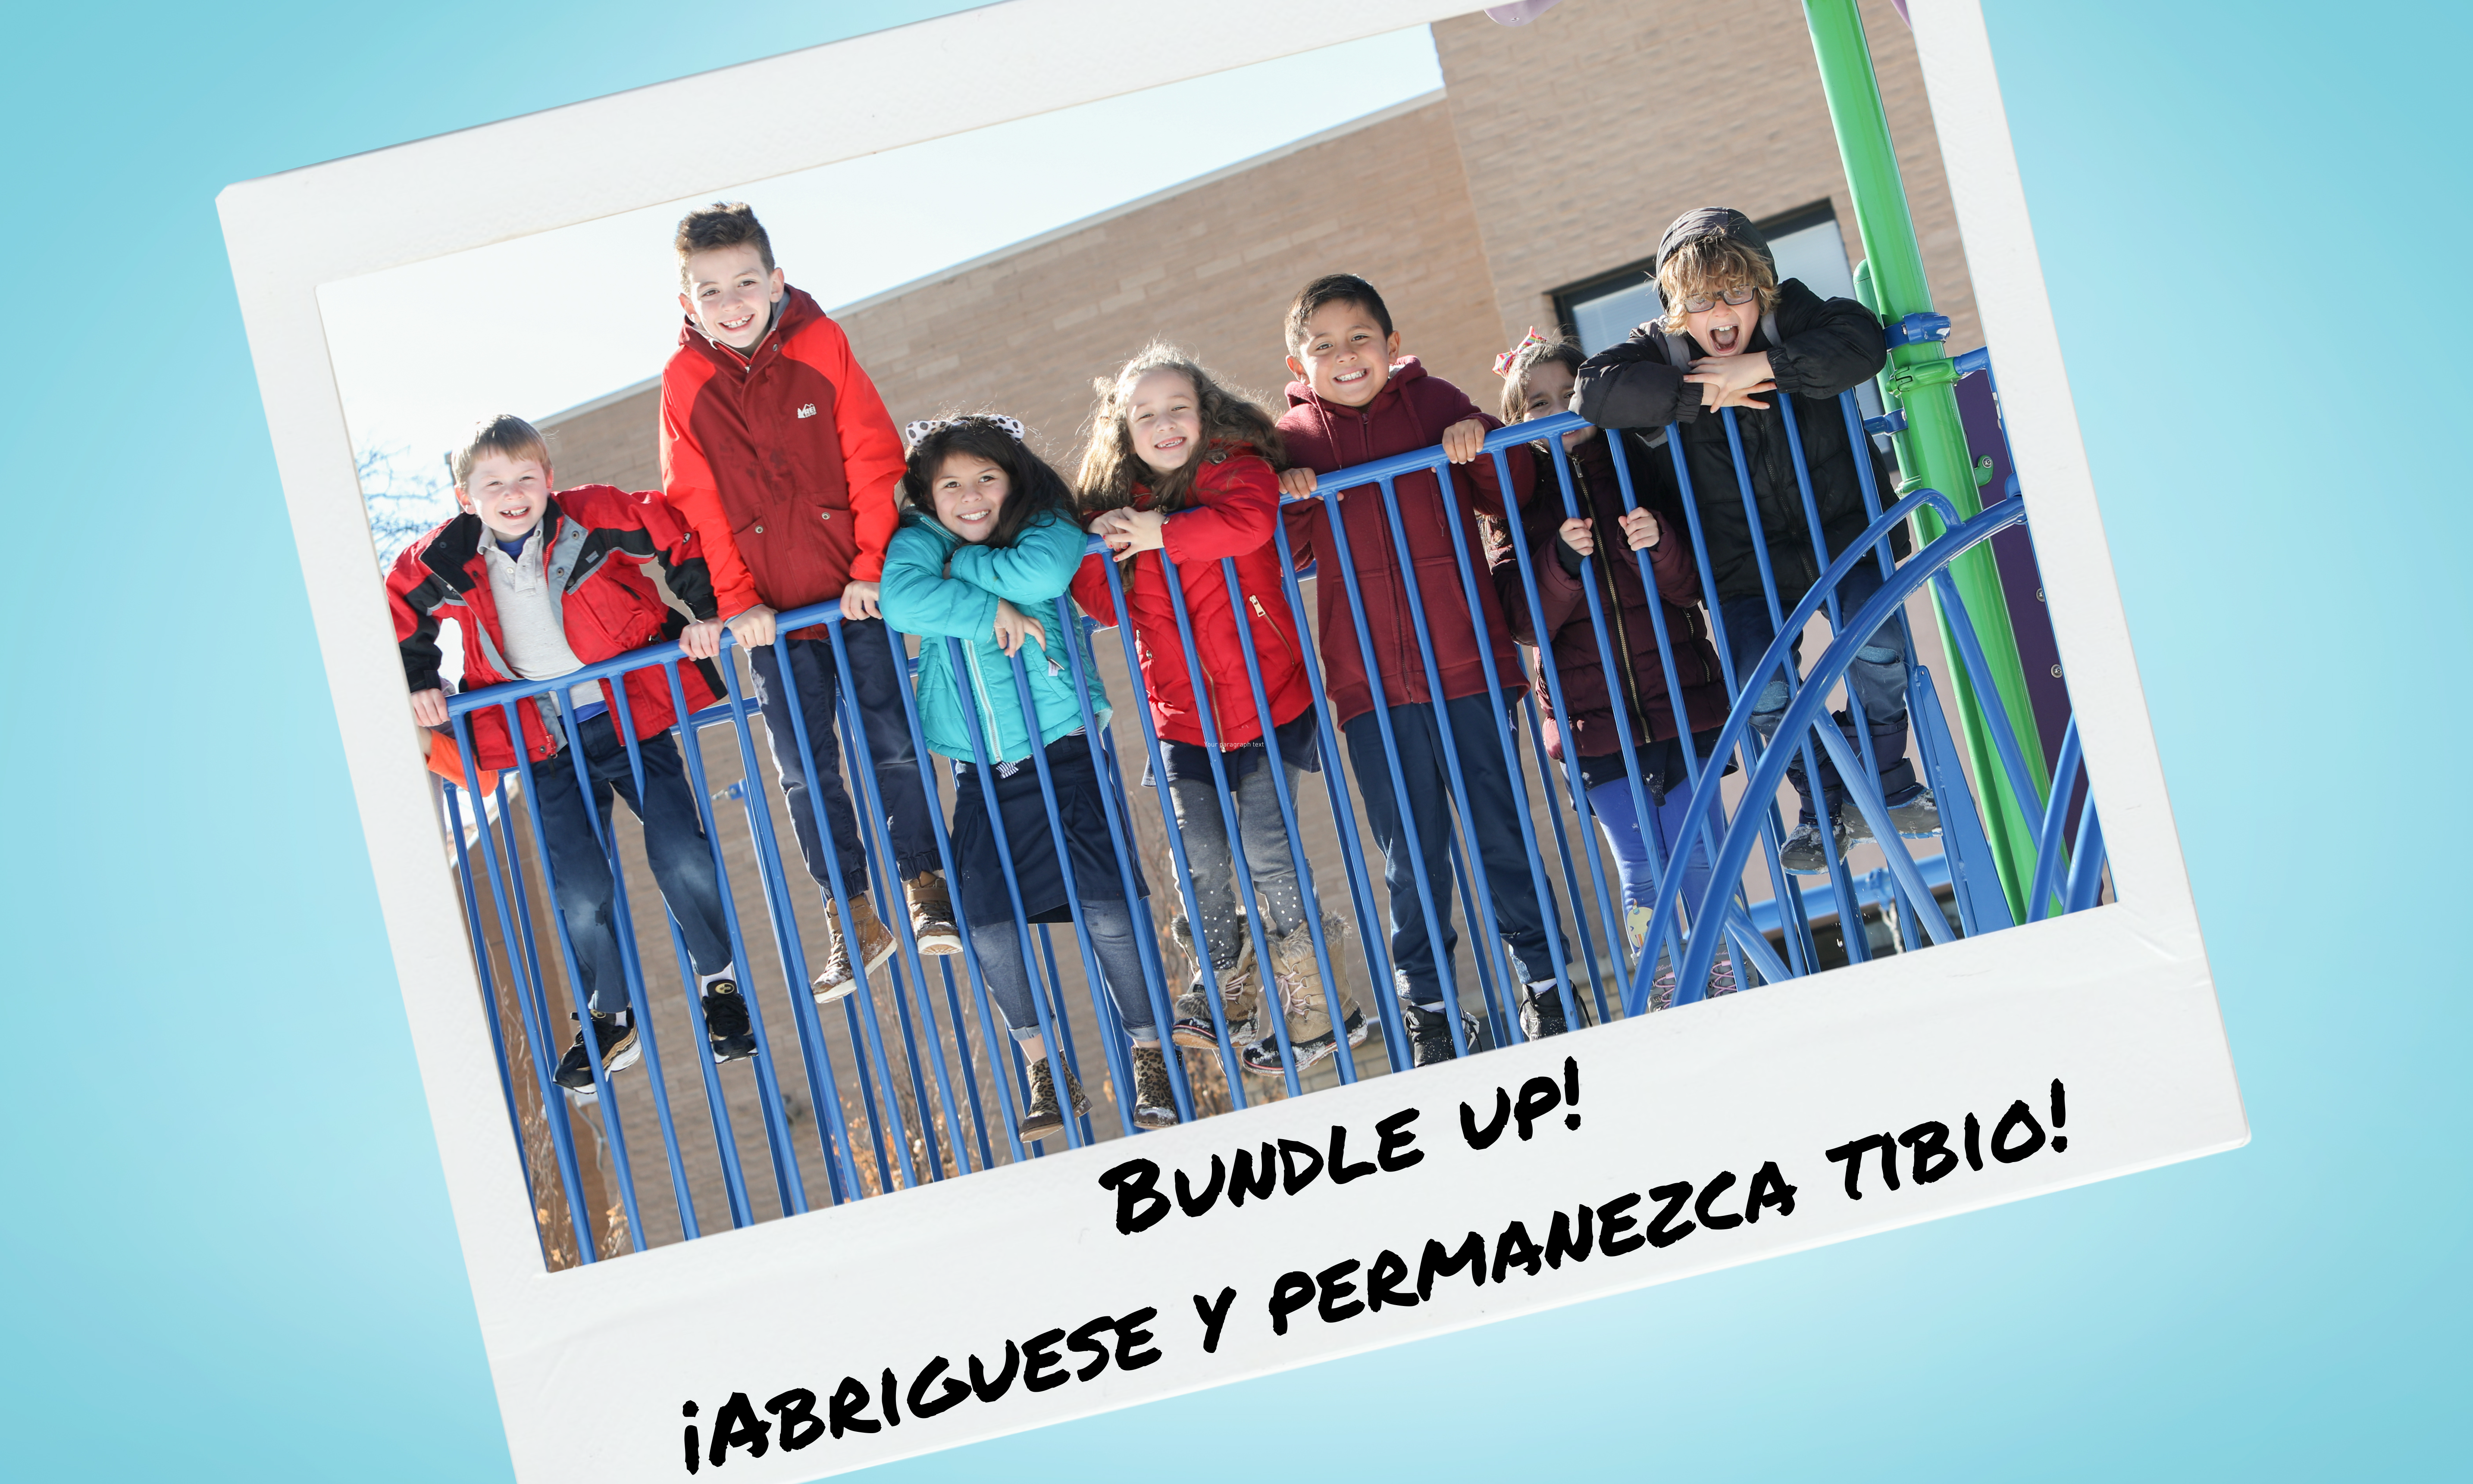 Photo of students in winter coats on playground equipment in a frame that looks like a Polaroid picture. Written under the picture in black ink is "Bundle up! / ¡Abriguese y permanezca tibio!